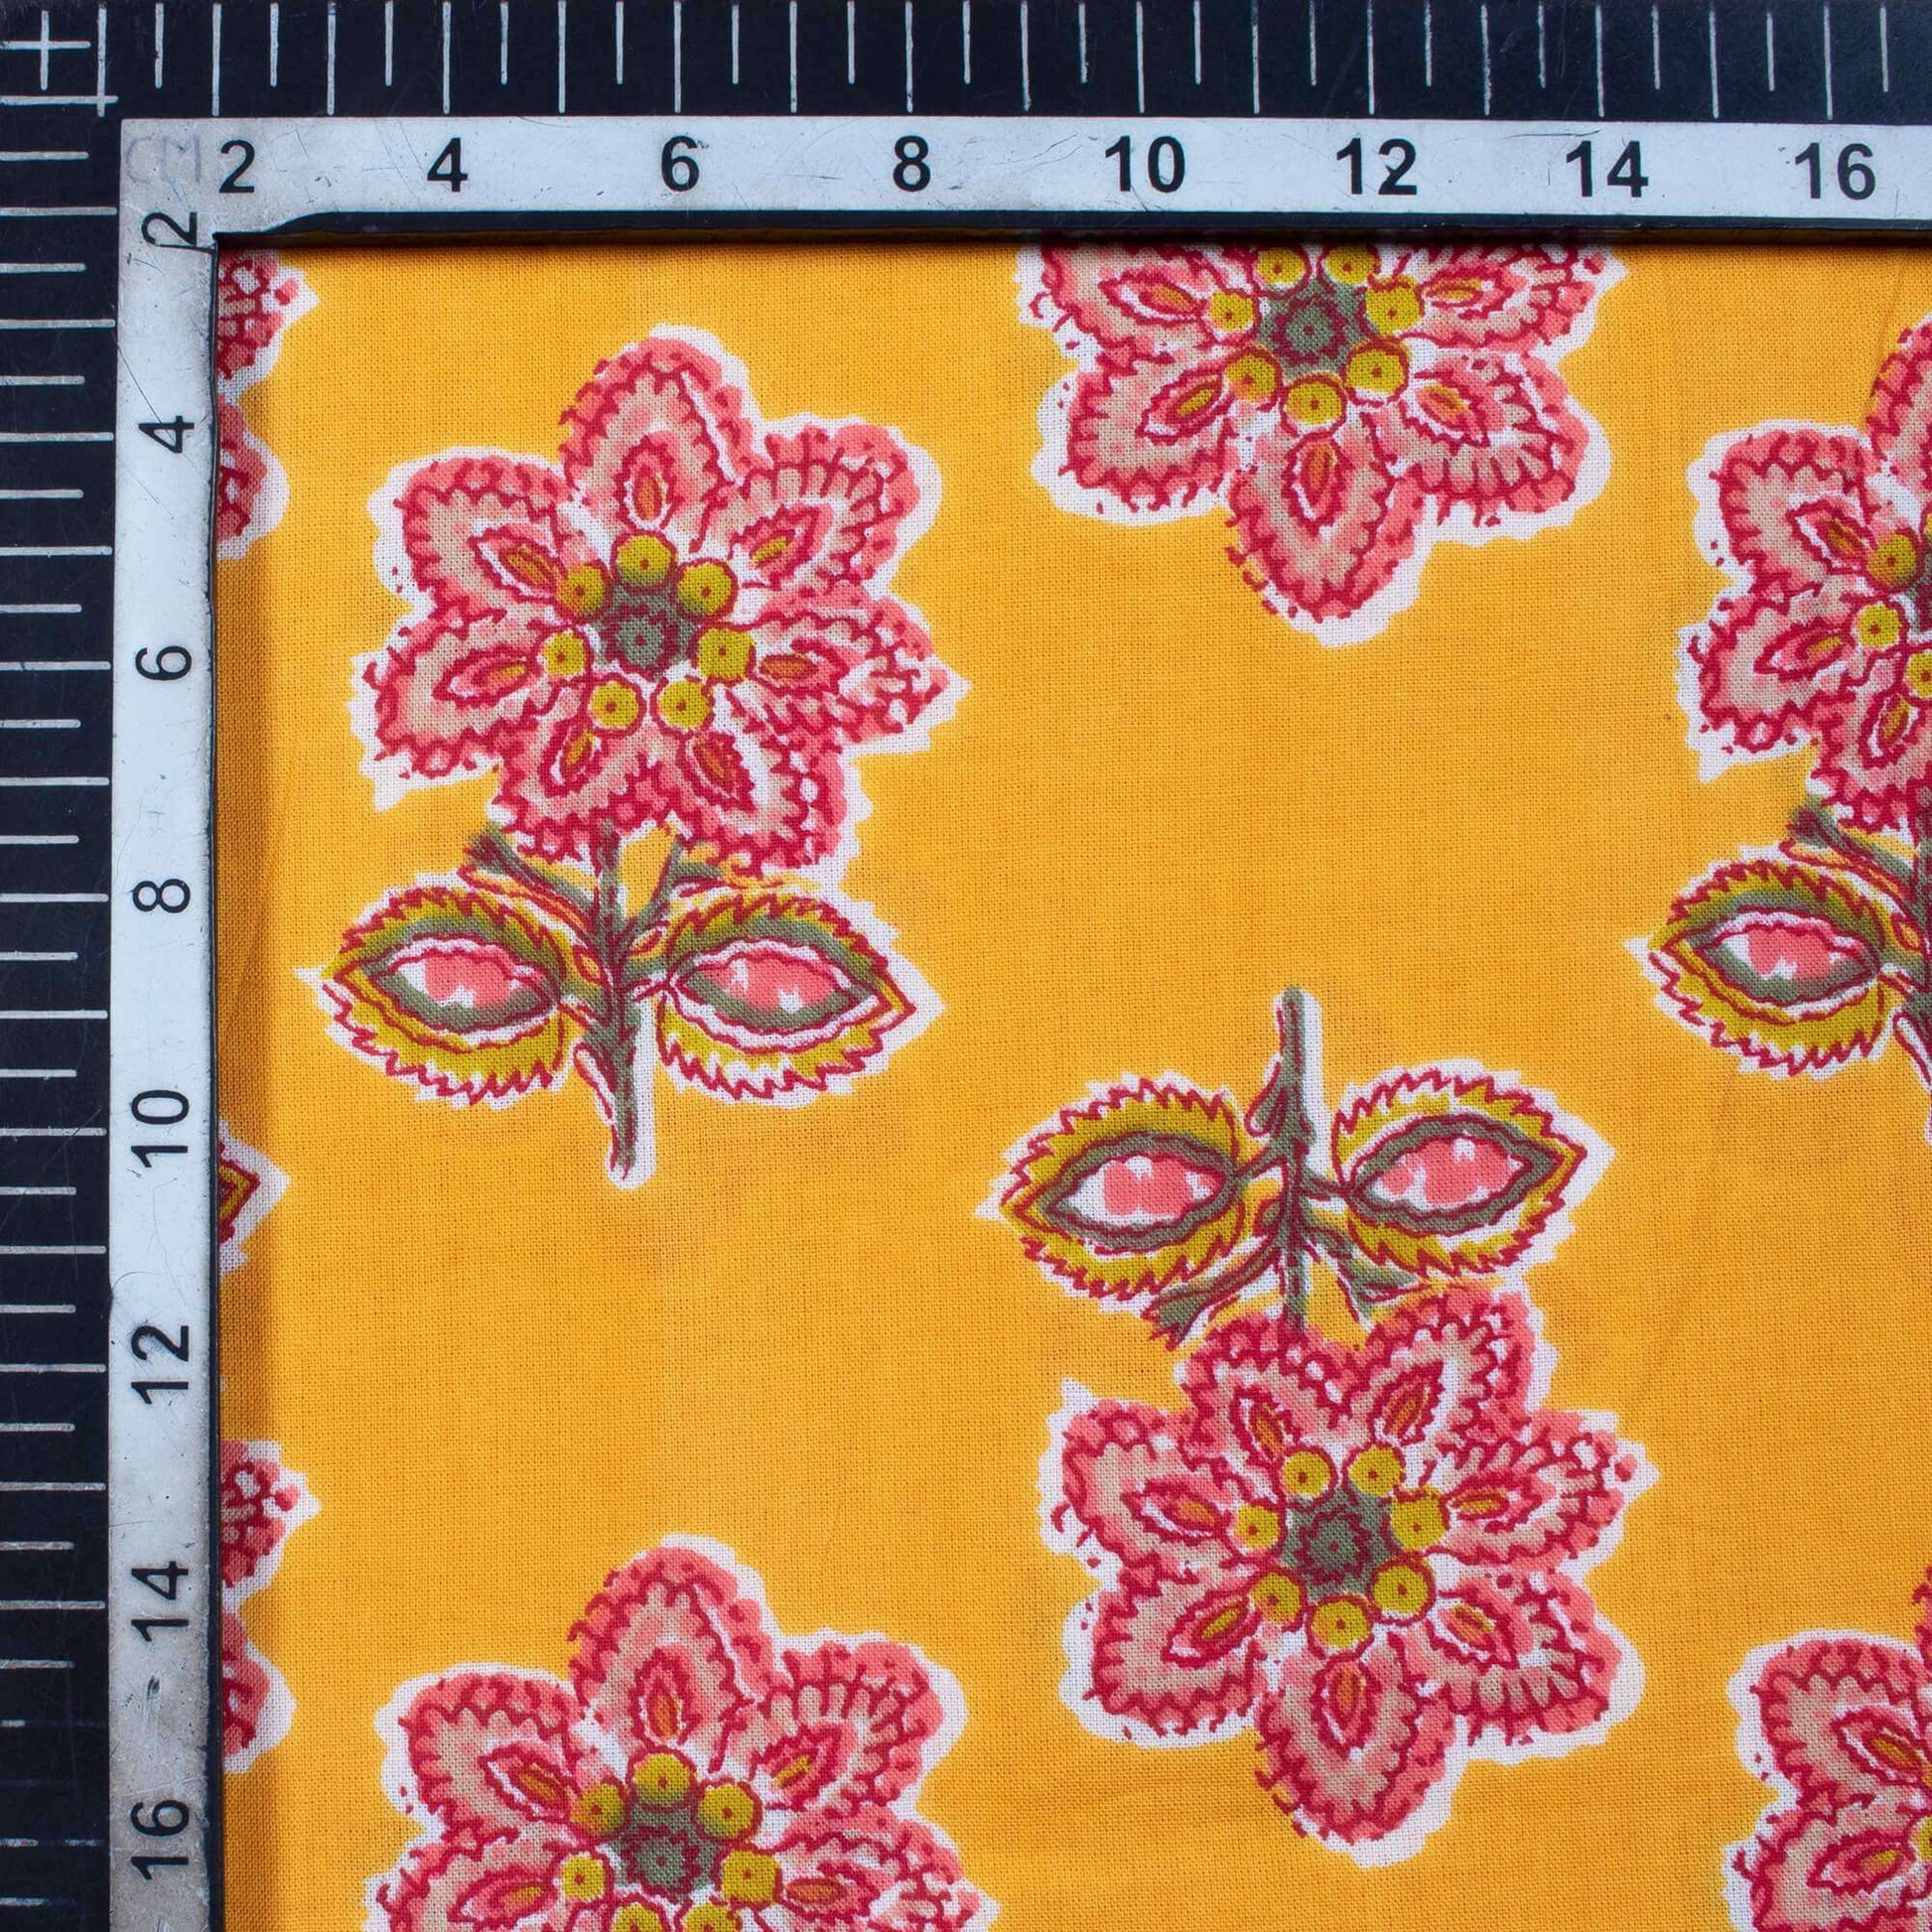 Honey Yellow And Punch Pink Floral Pattern Screen Print Cotton Mulmul Fabric - Fabcurate